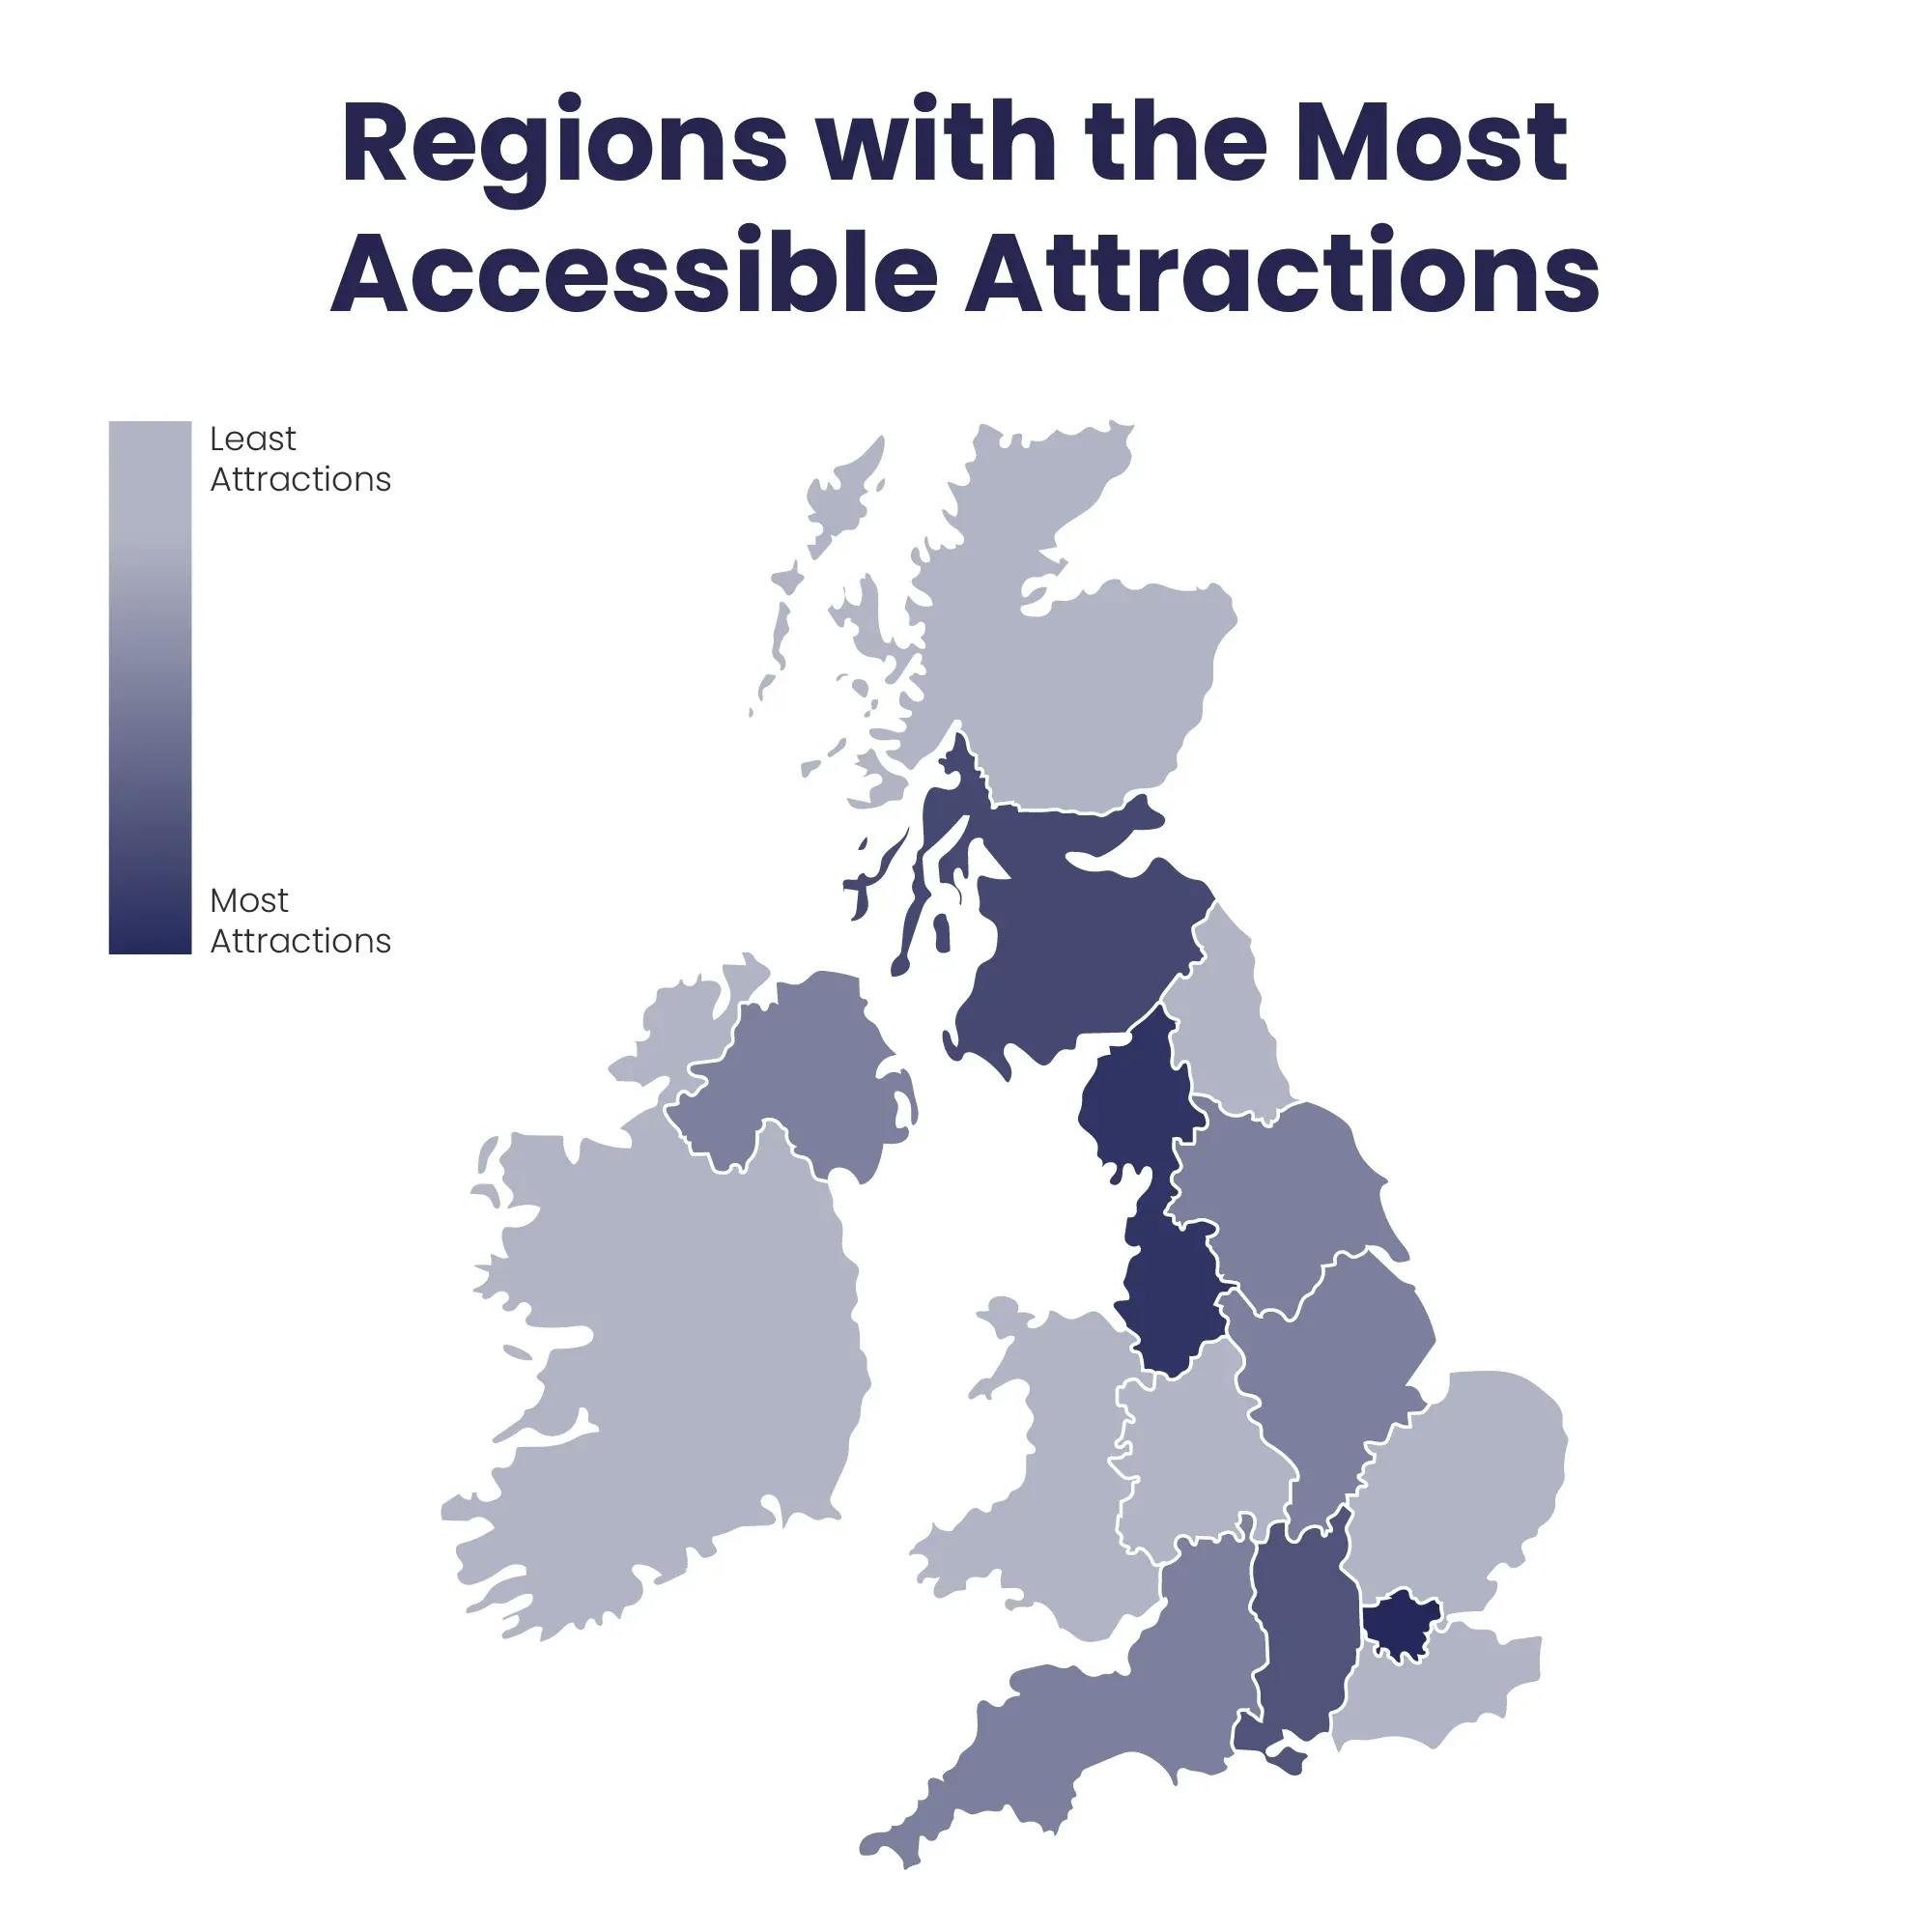 Regions with the Most Accessible Attractions